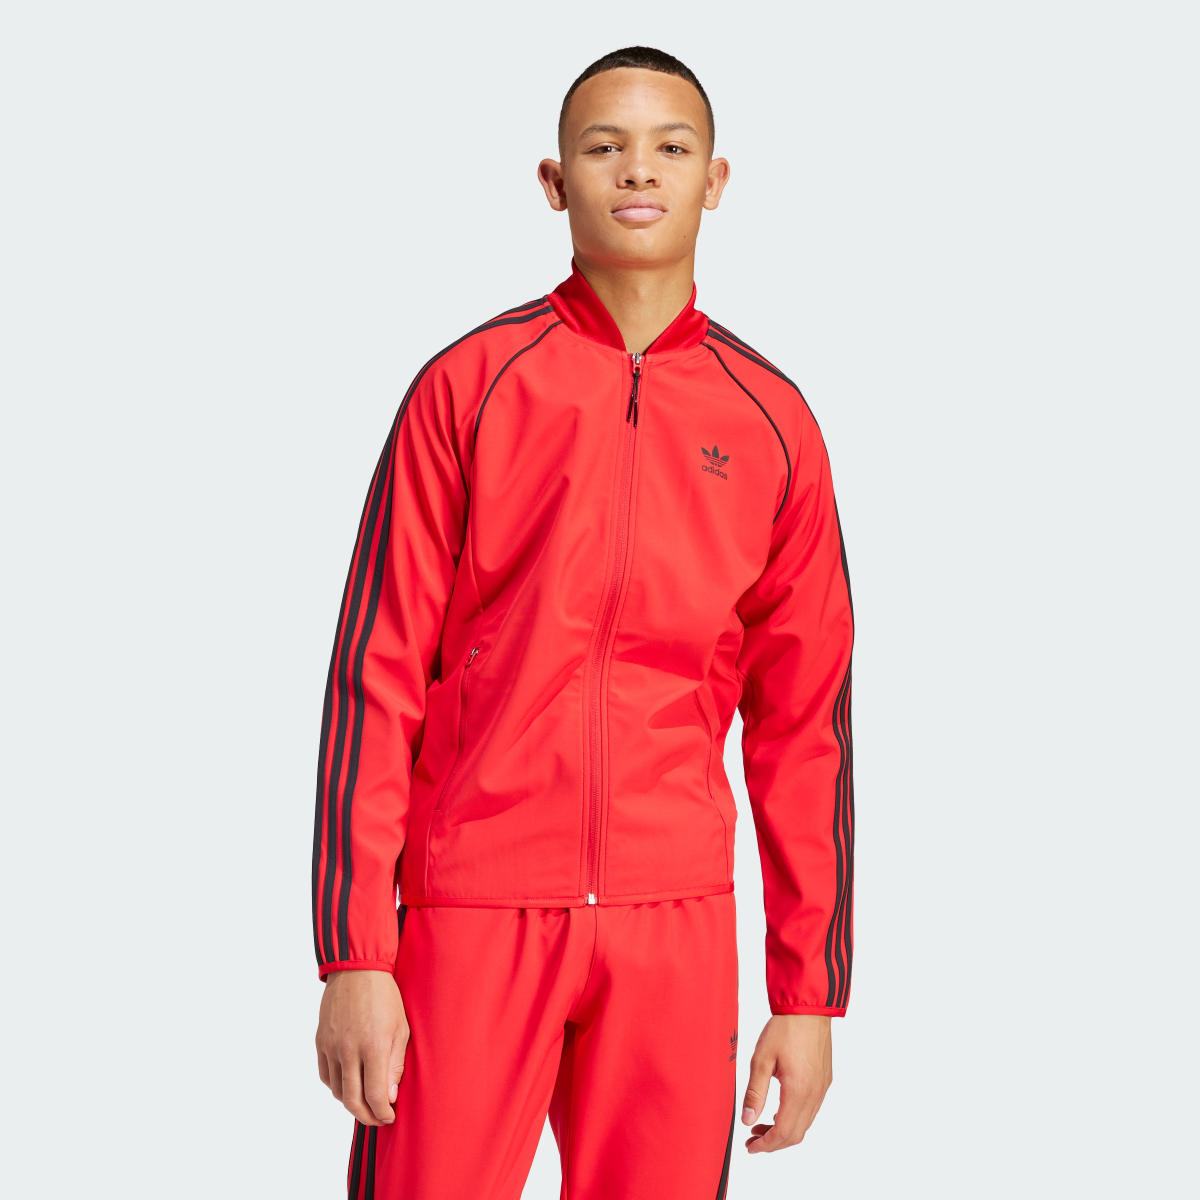 Adidas SST Bonded Track Top. 4